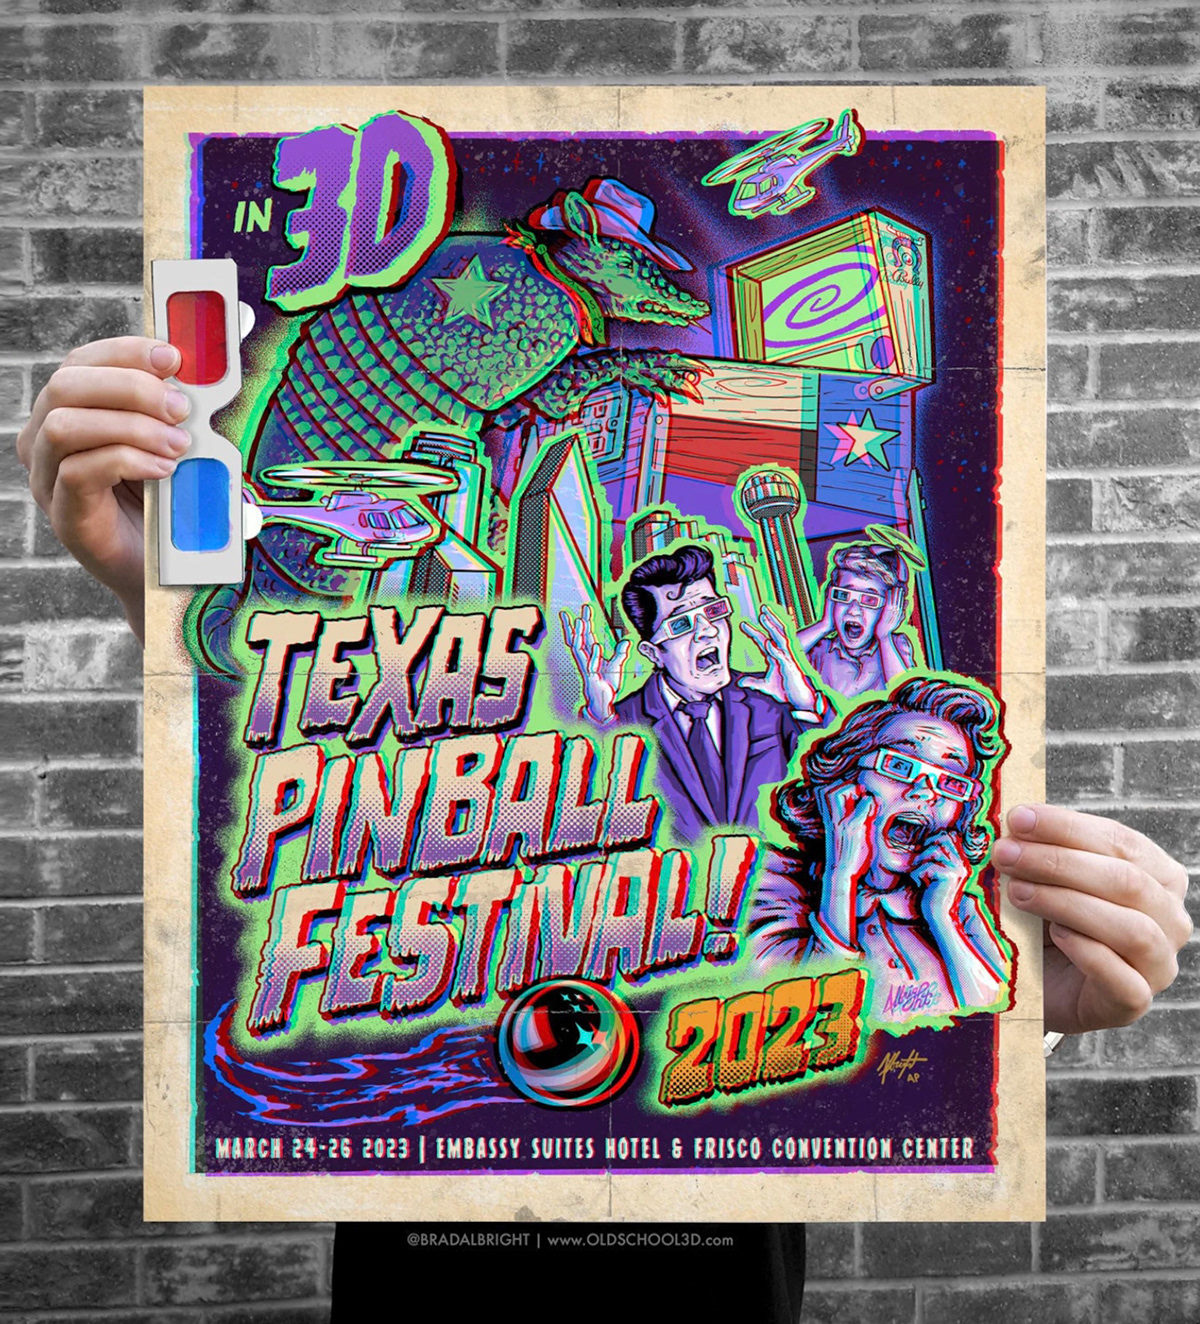 poster anaglyphic stereoscopic pinball pinball machine 3d Poster anaglyph